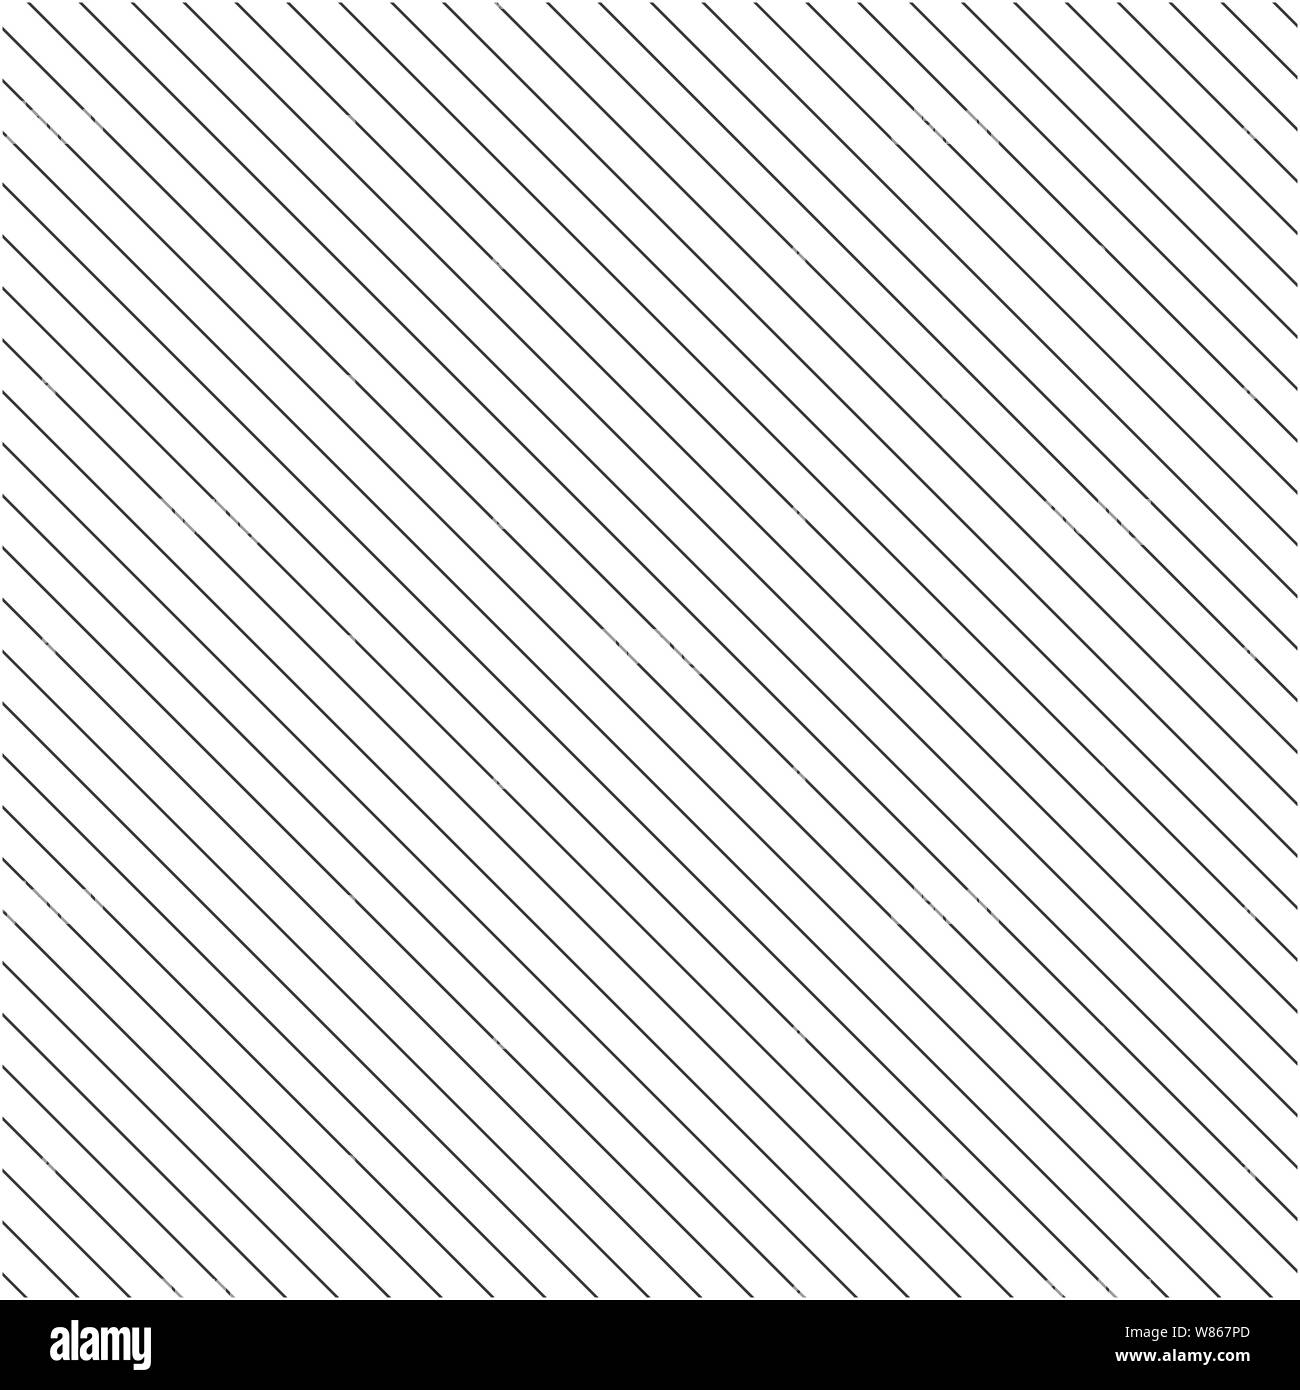 Diagonal lines on white background. Abstract pattern with diagonal ...